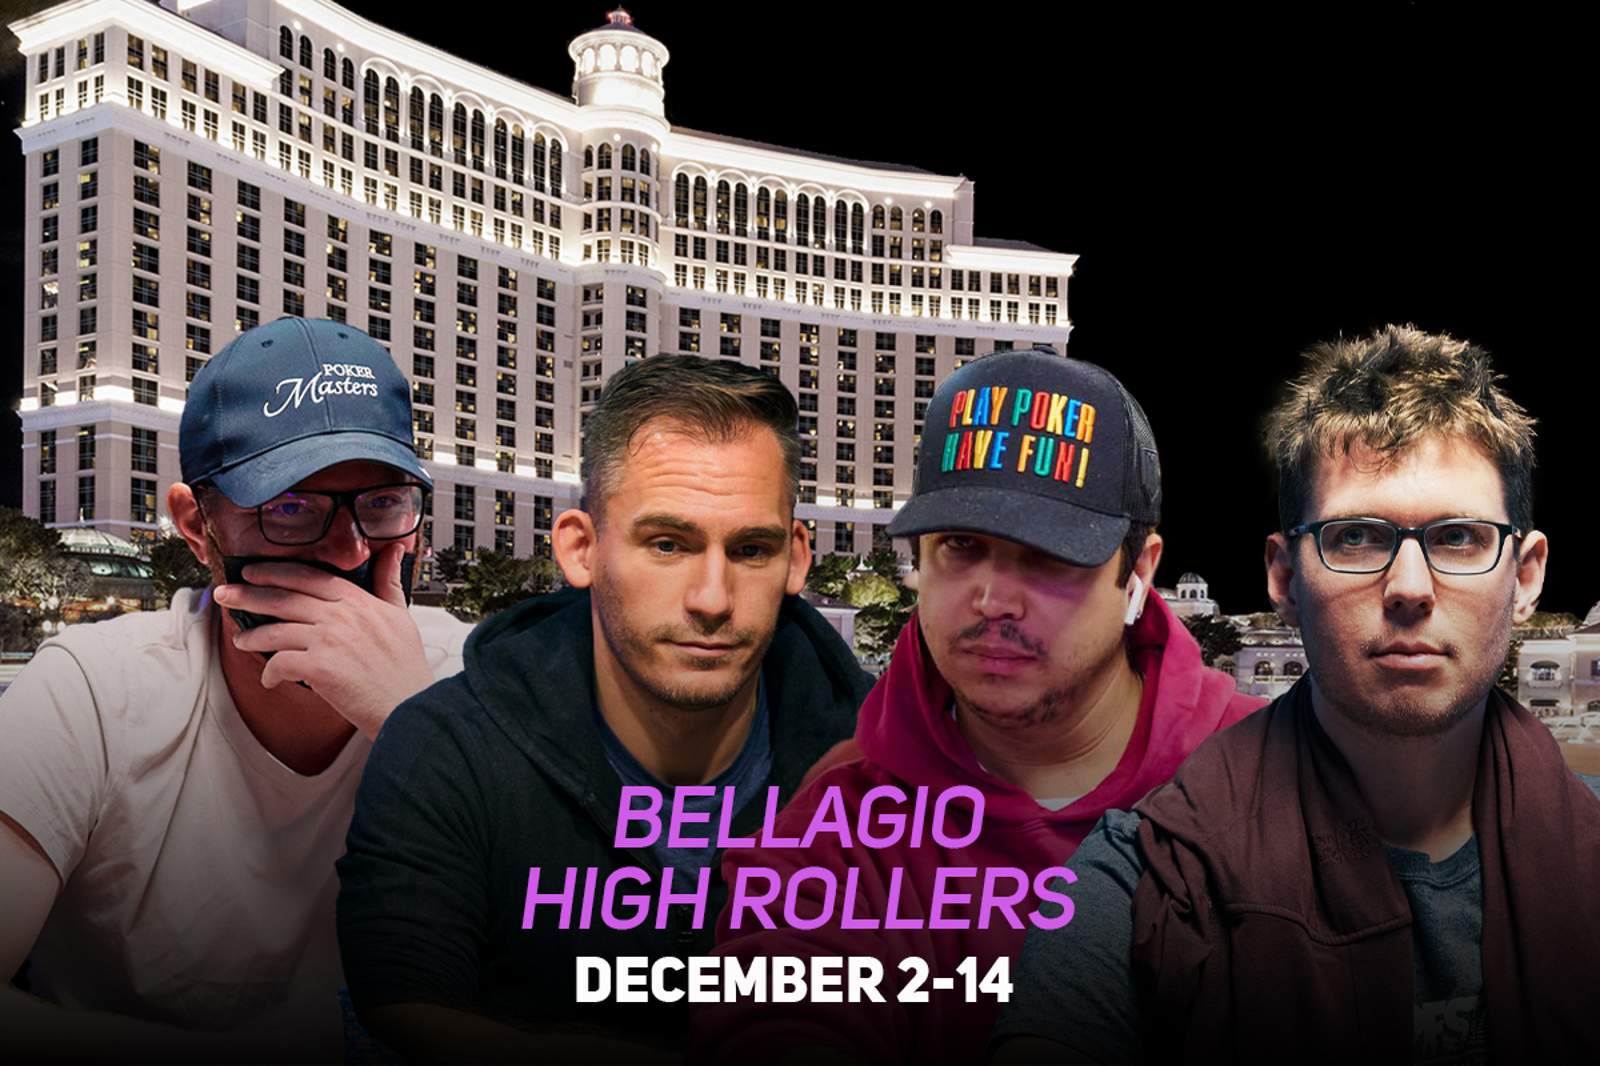 Bellagio High Rollers Conclude with Justin Bonomo, Nick Petrangelo, Felipe Ramos, and Andrew Lichtenberger Collecting Wins